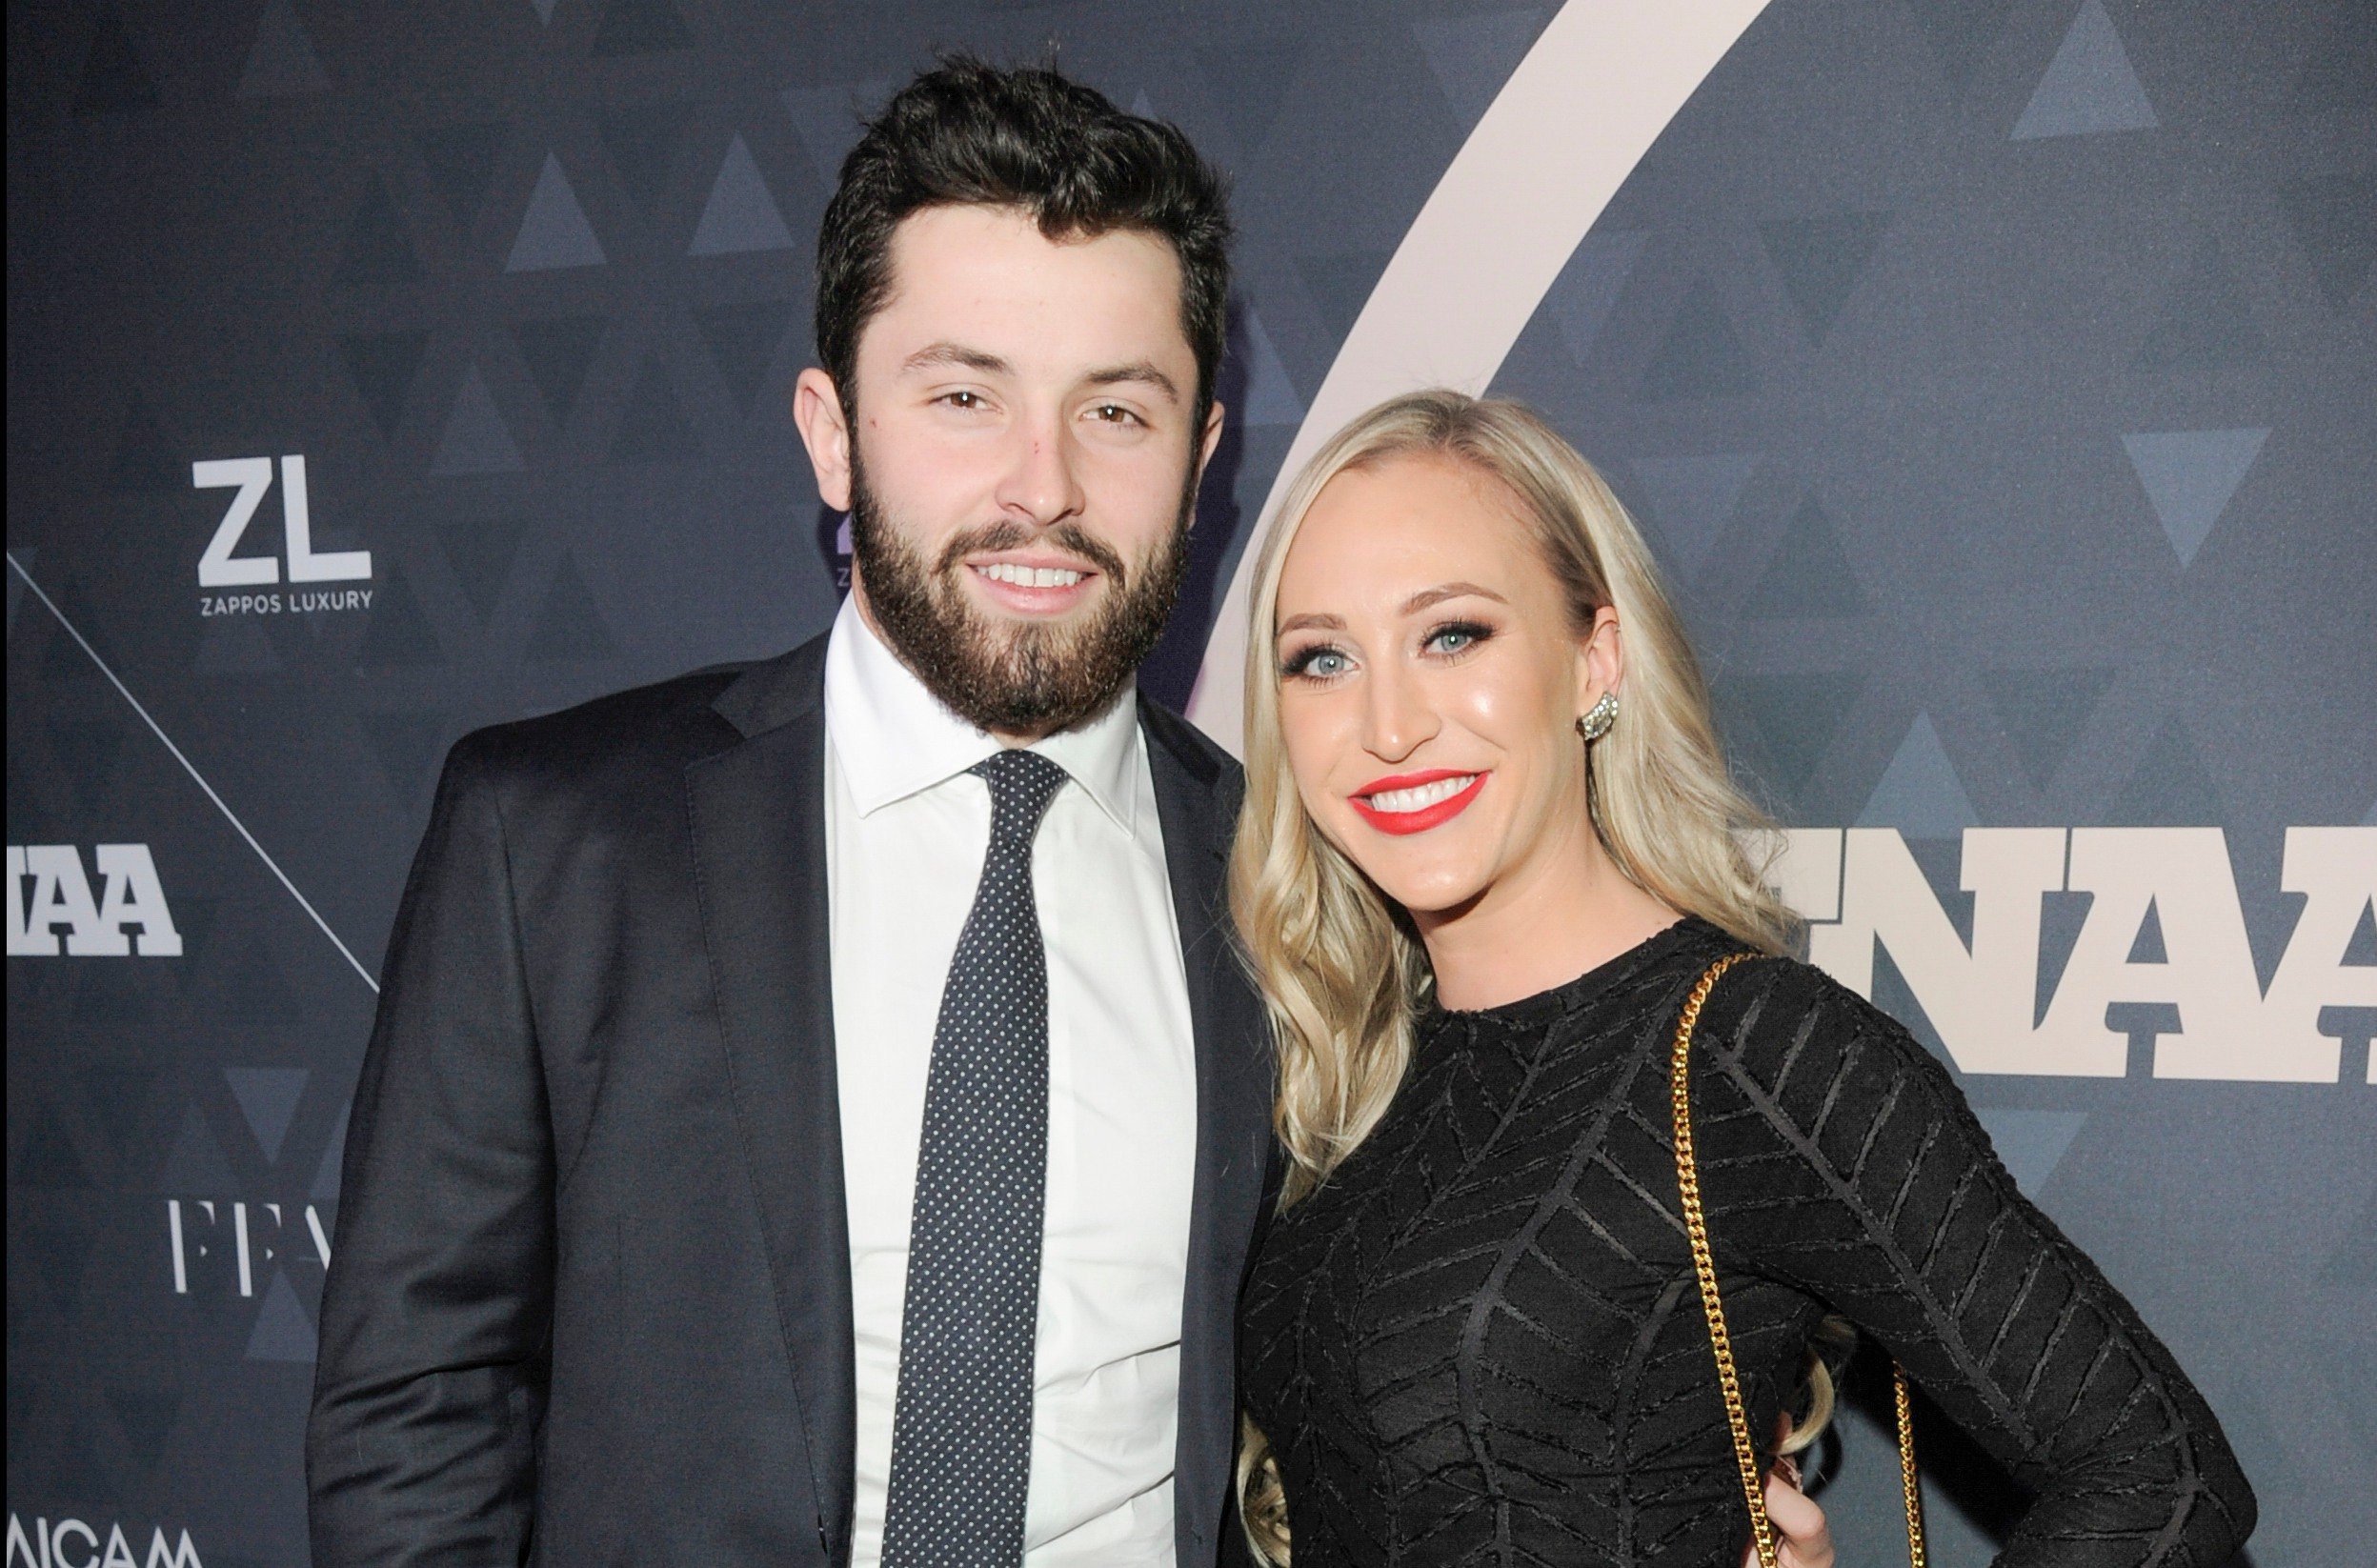 Browns Quarterback Baker Mayfield pictured with wife Emily Wilkinson